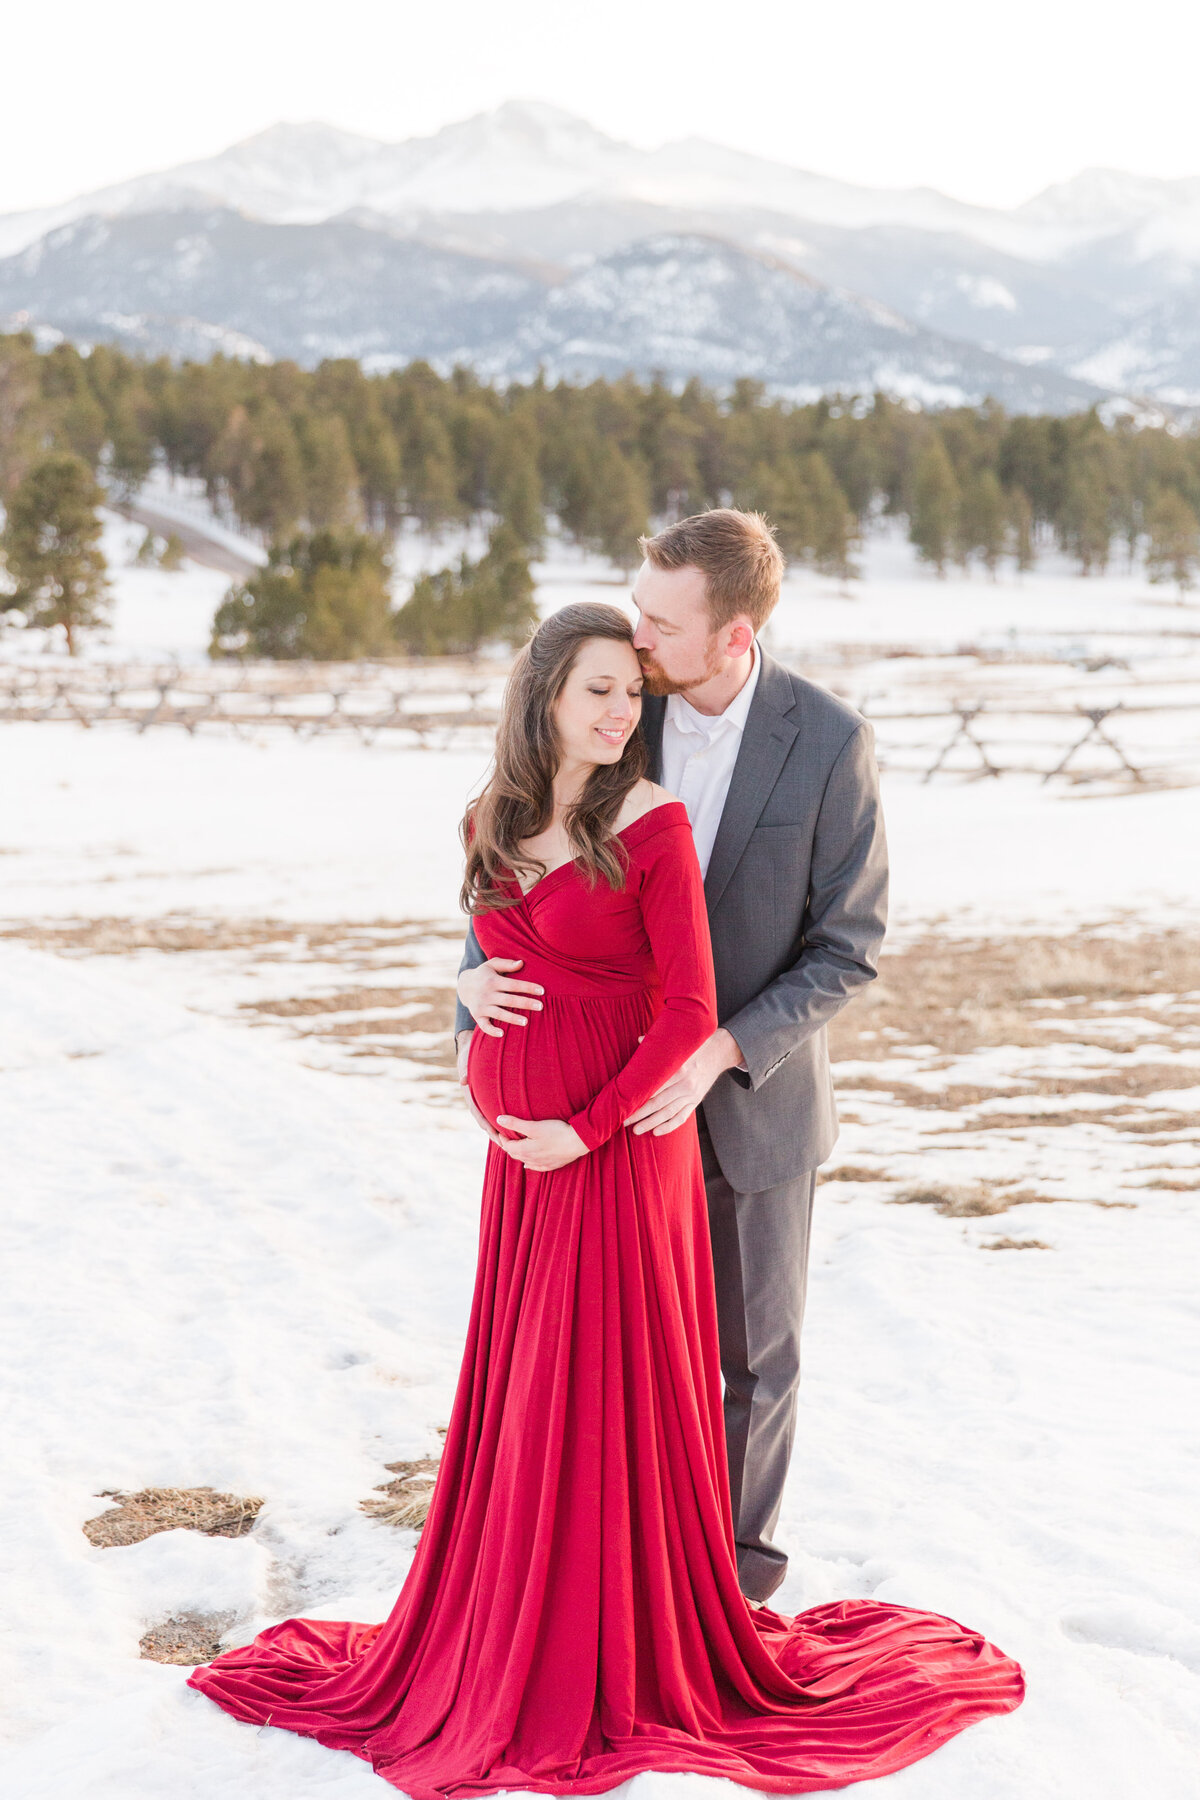 Red dress maternity session husband kisses wife's forehead Estes Park, Colorado